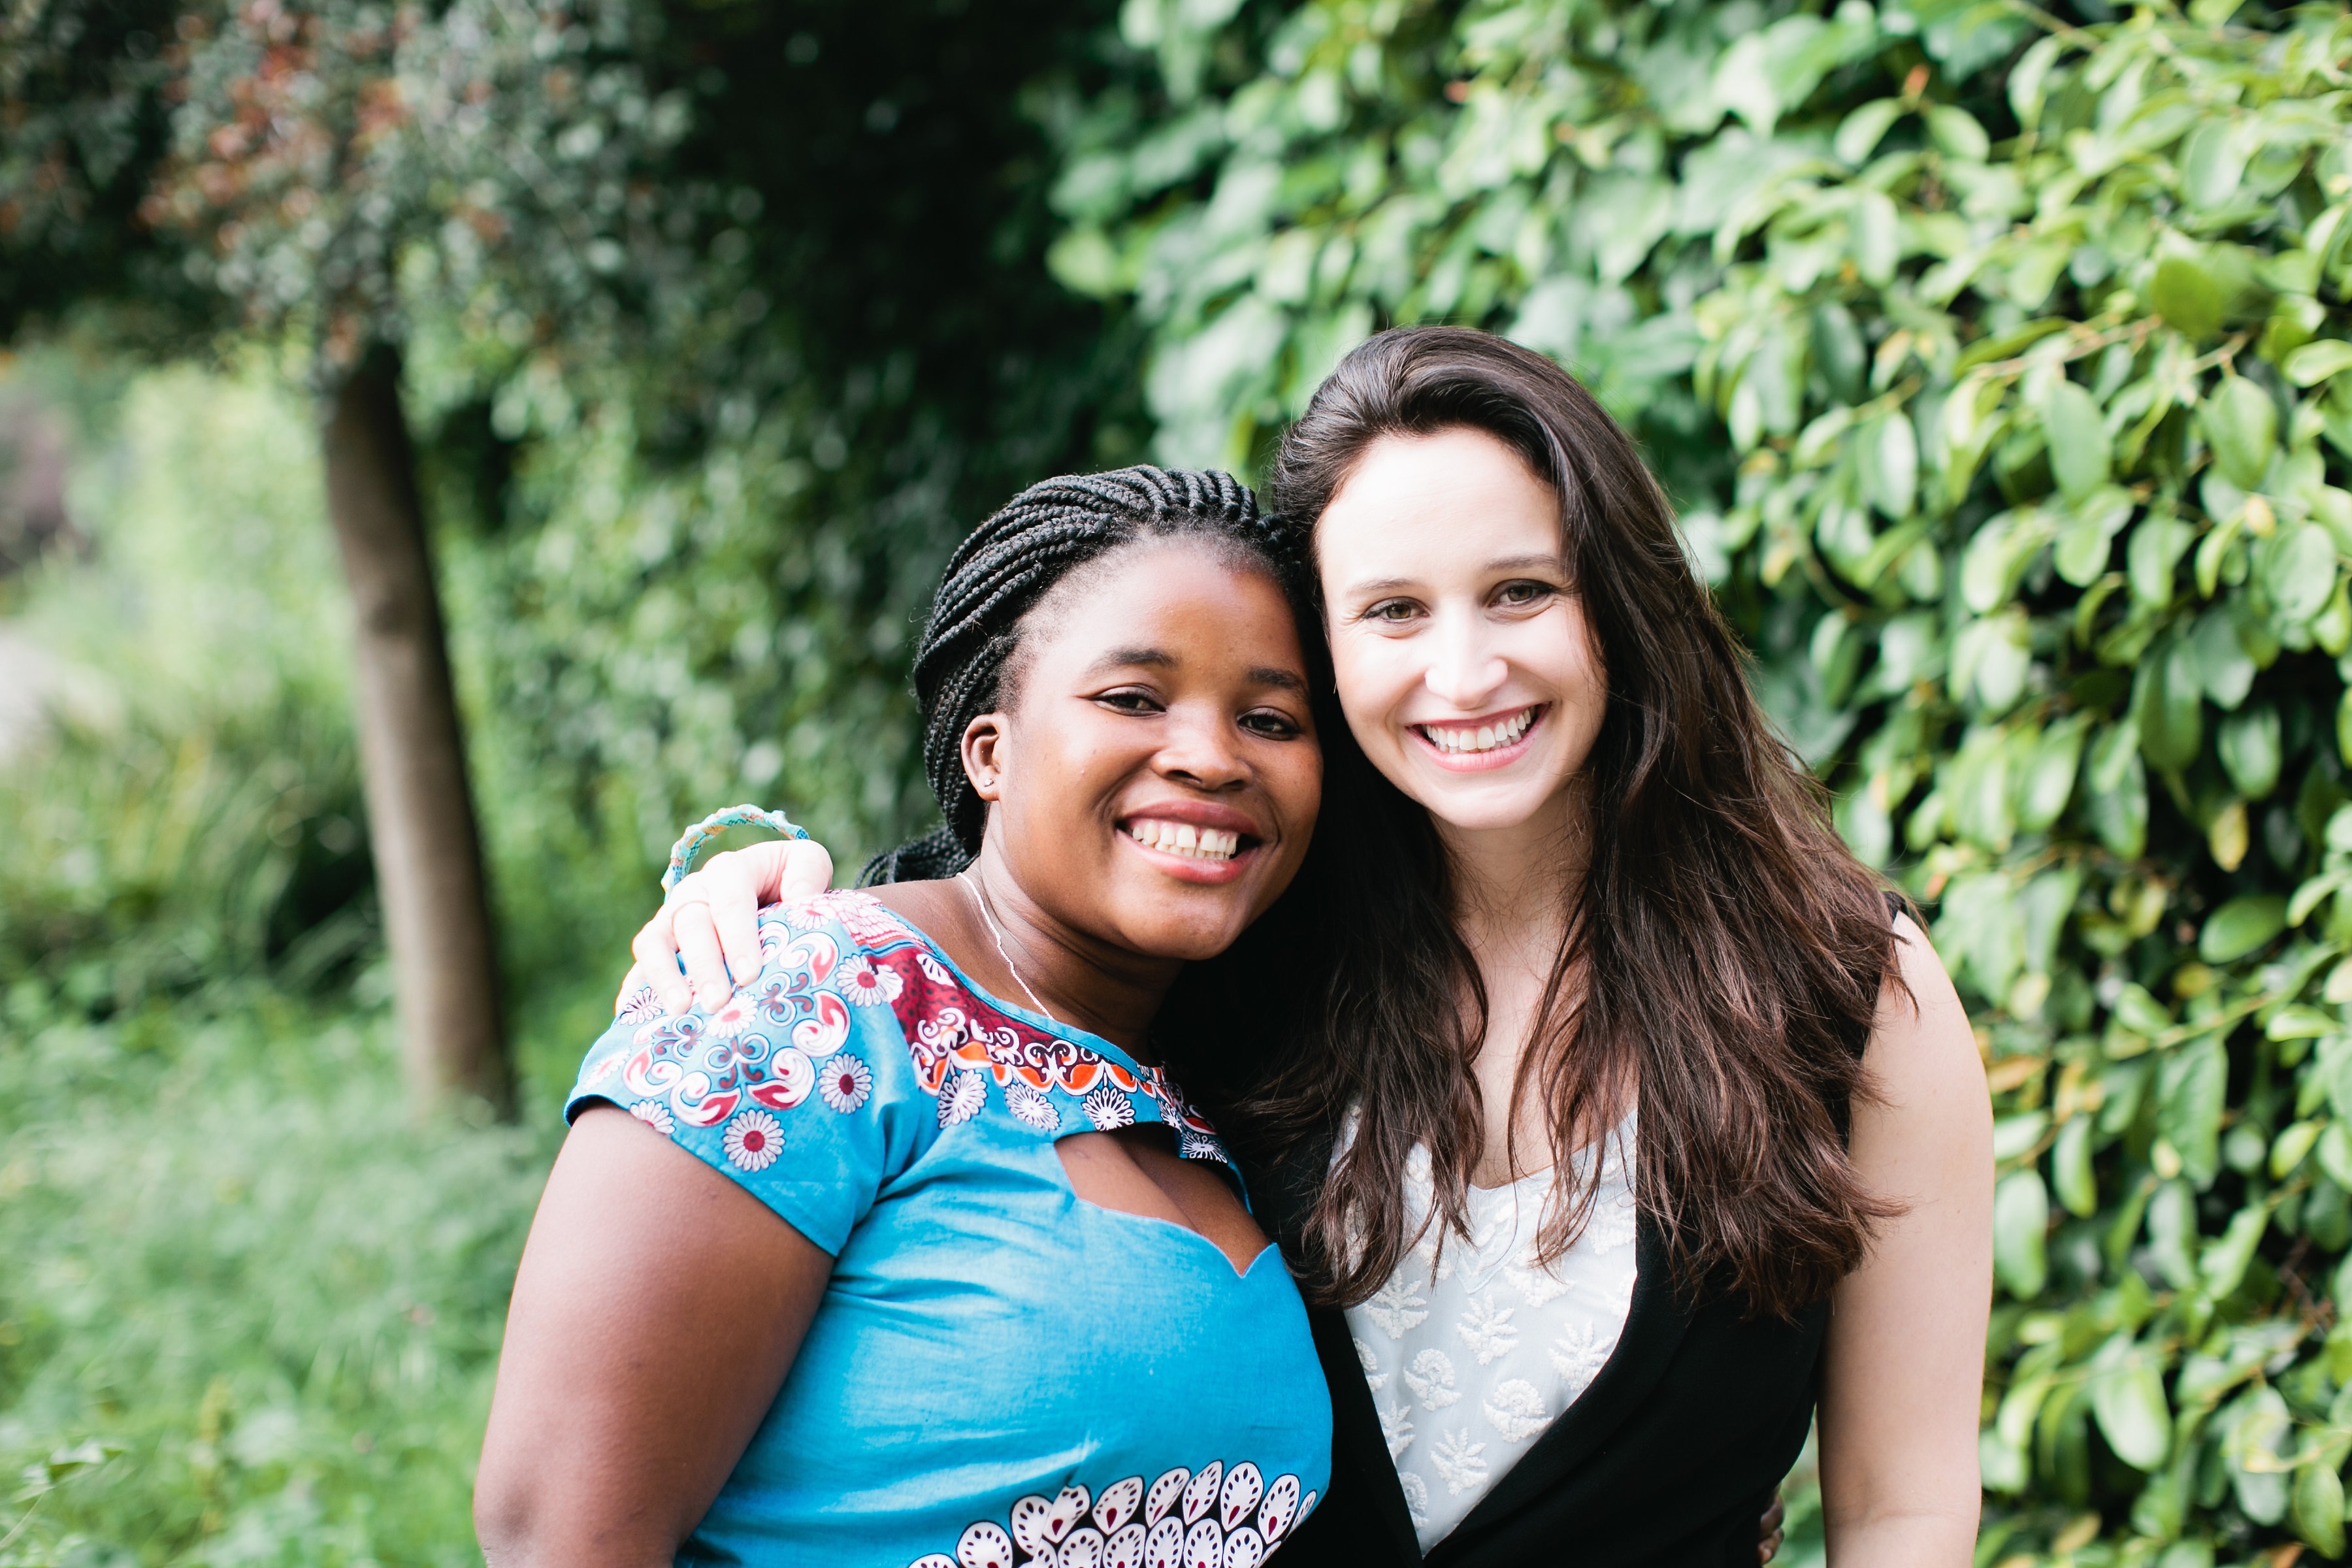 Percina and Elisabetta, two wonderful friends who met in a village in Mozambique while Elisabetta was a Peace Corps volunteer. Photo credit: Nicole Anderson of Sorella Muse Photography